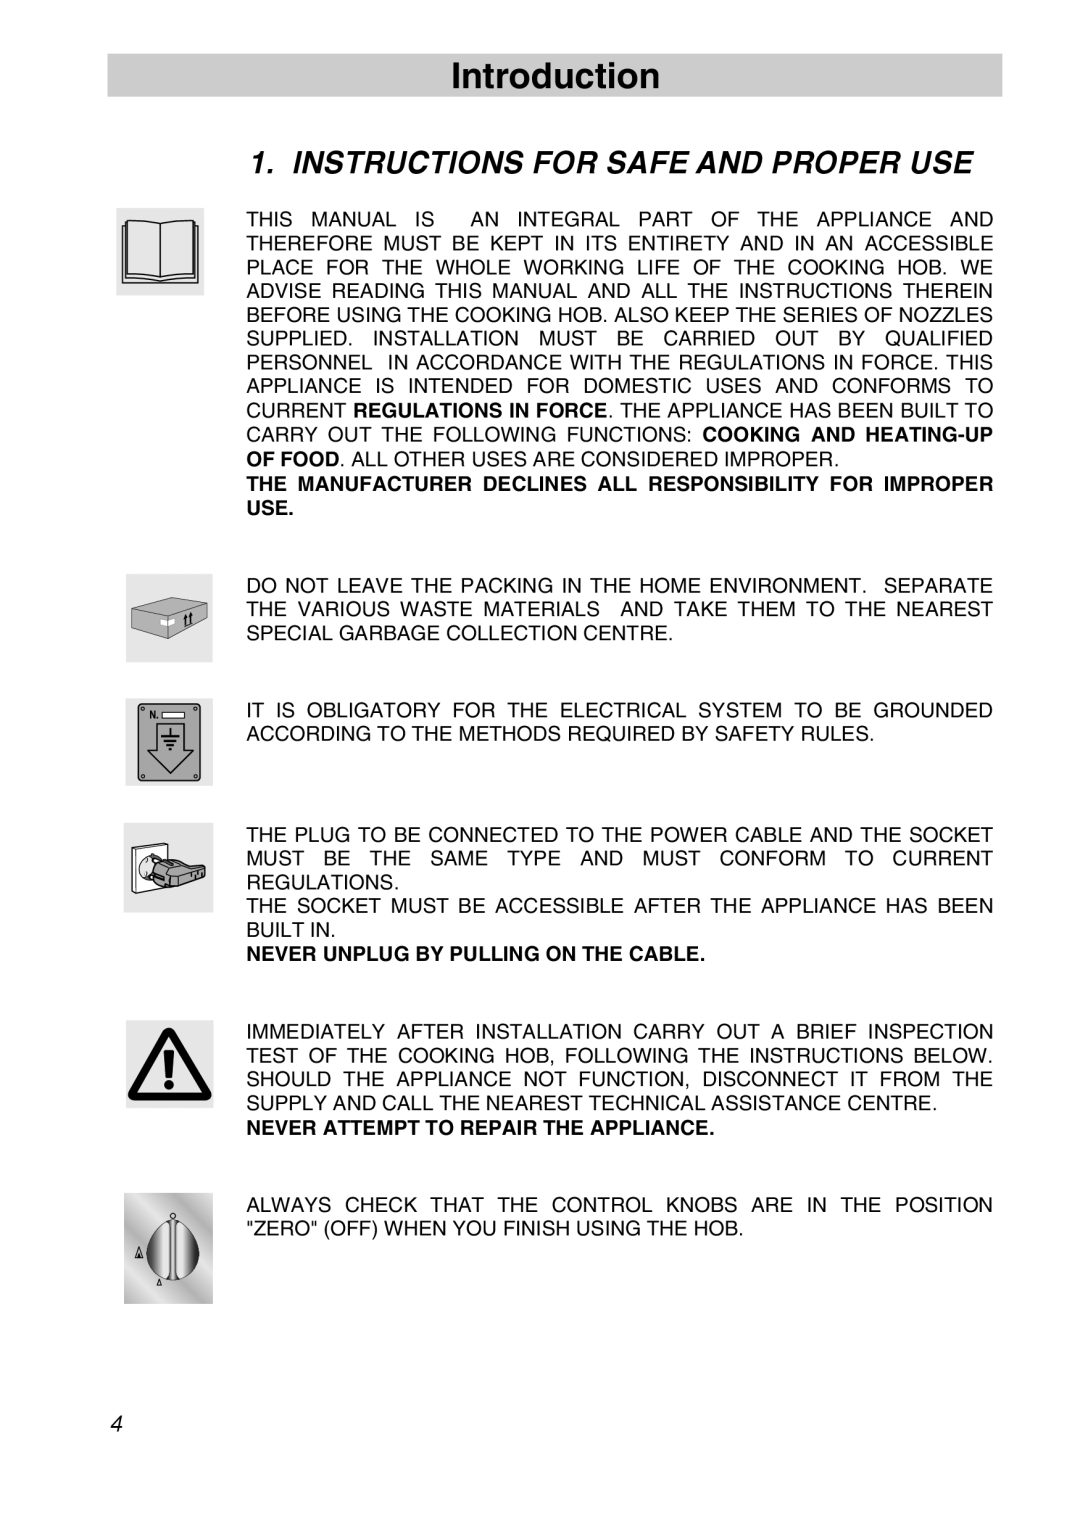 Smeg CIR597X5 manual Introduction, Instructions For Safe And Proper Use, Never Unplug By Pulling On The Cable 